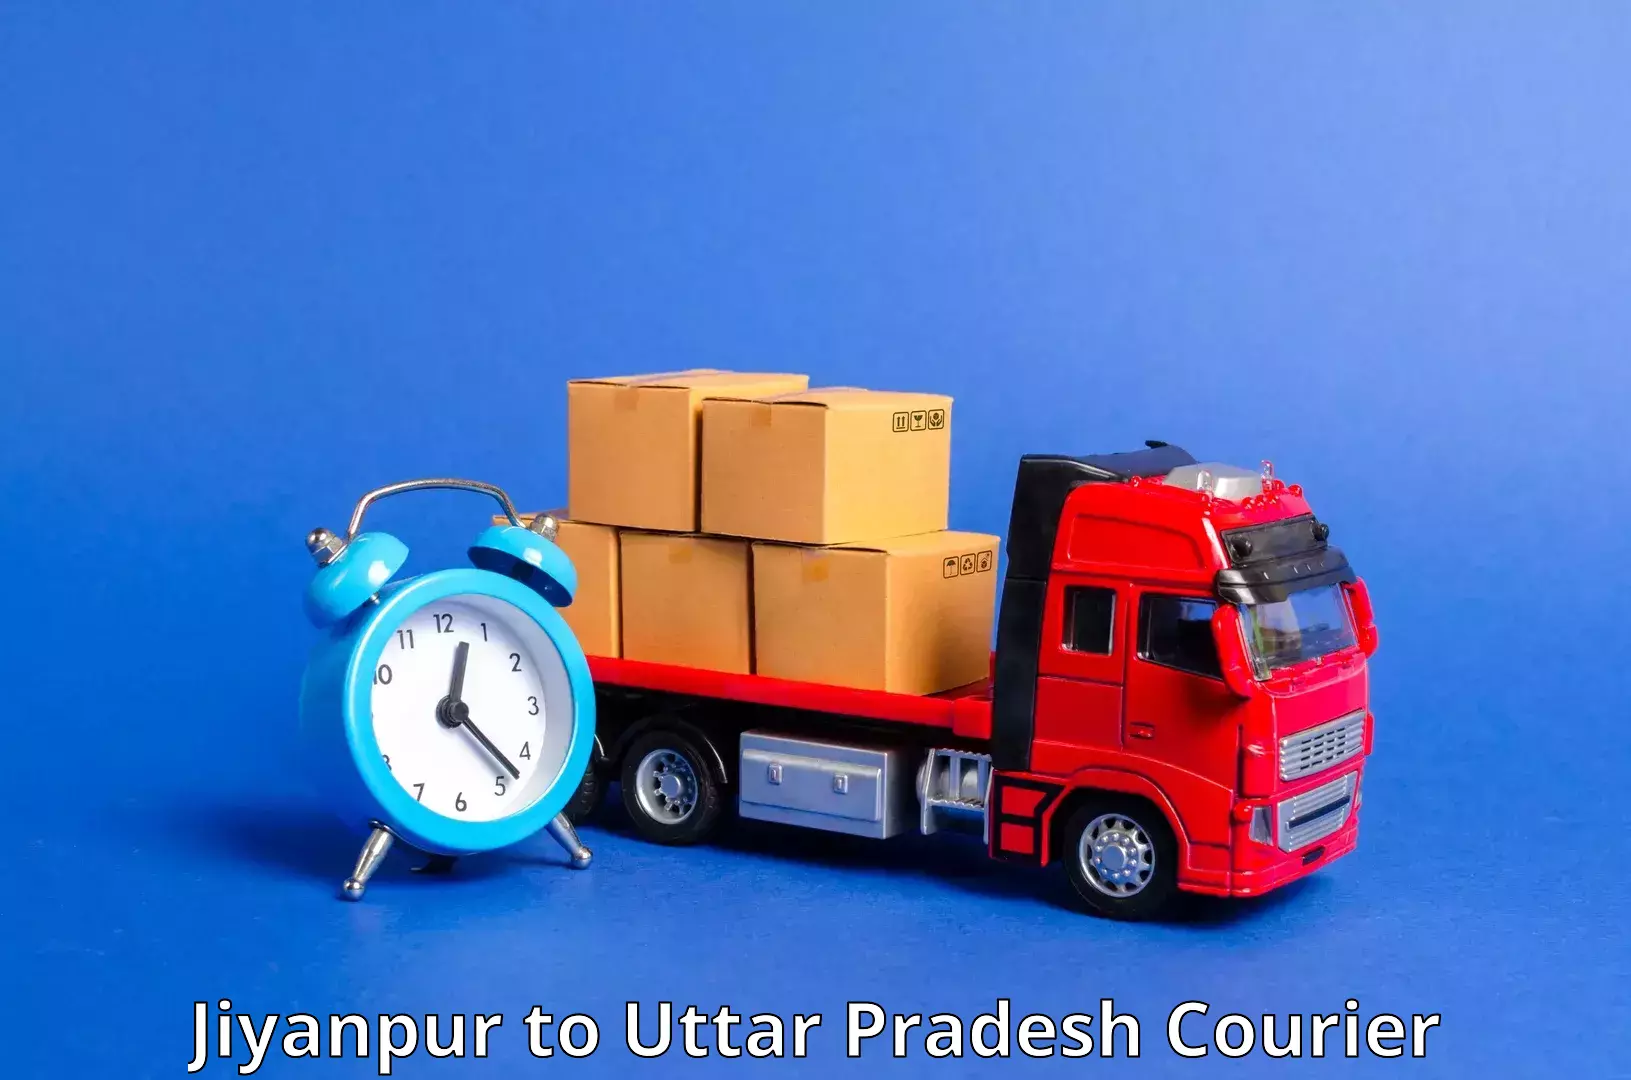 Courier service efficiency Jiyanpur to Mirzapur